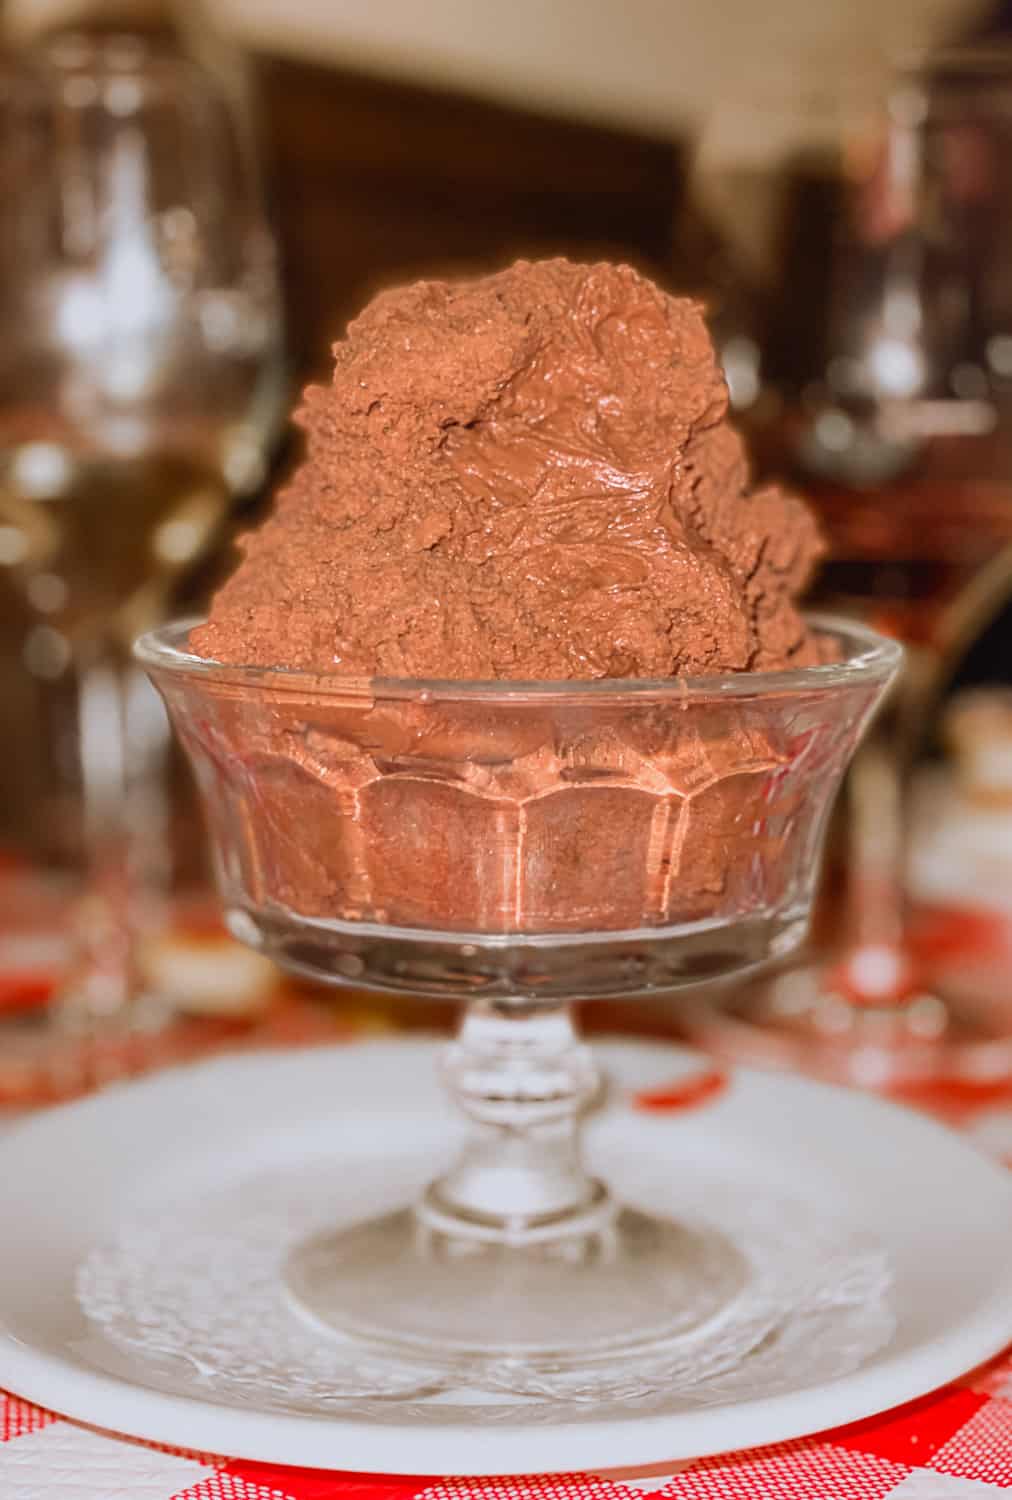 Chocolate mousse on a table at a restaurant in Paris